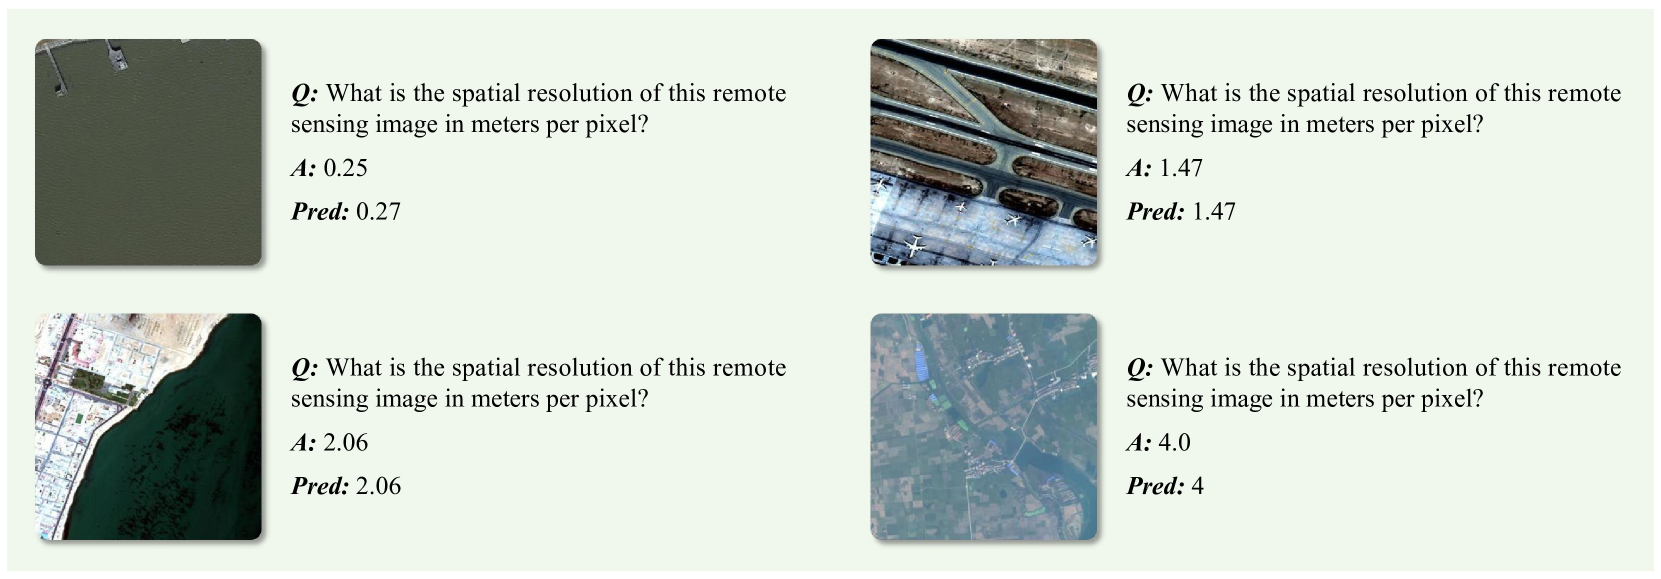 Figure 10: Examples of the results from image ground sampling distance estimation task.